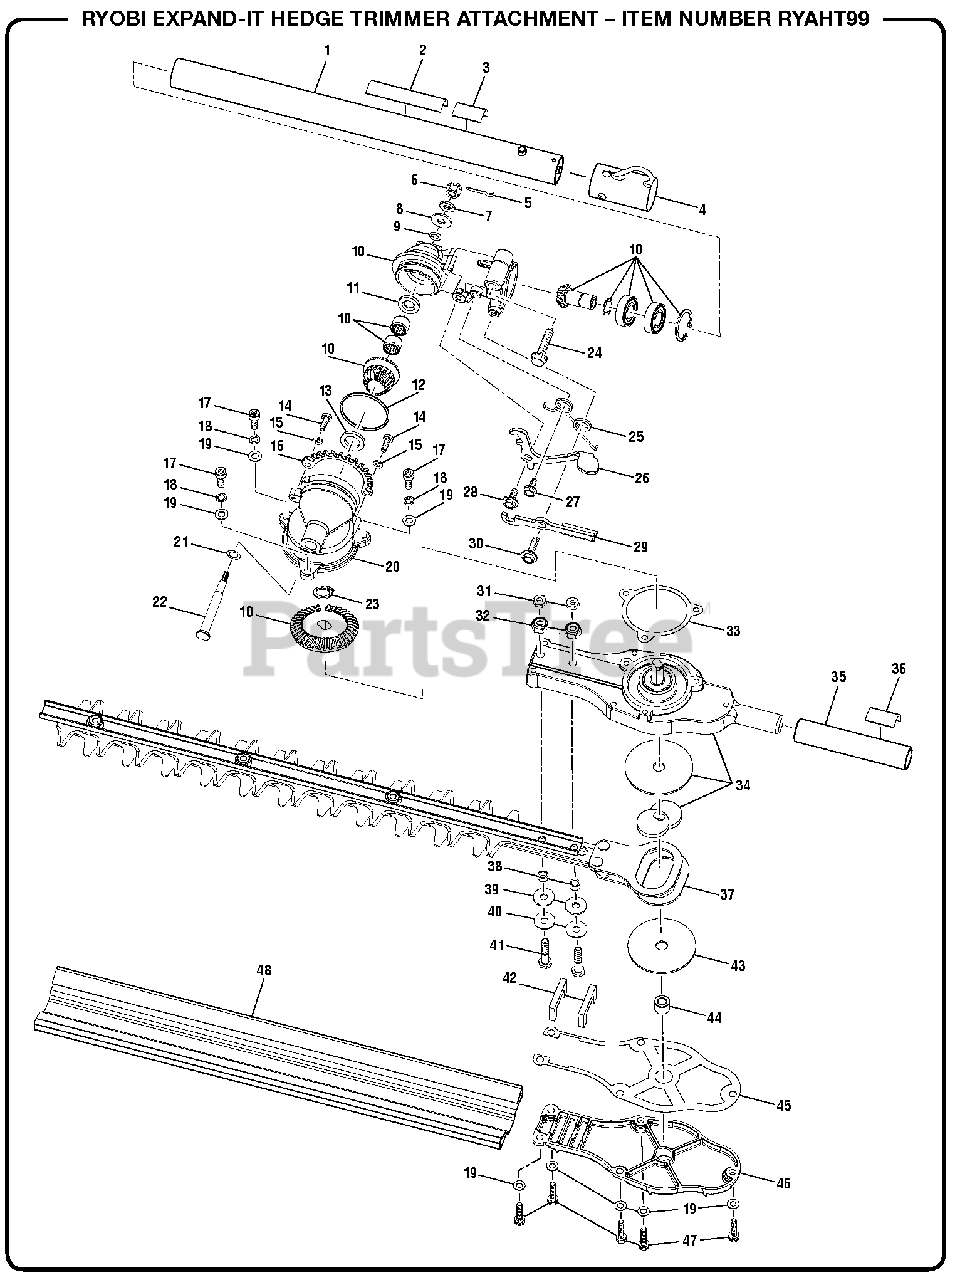 Matematik spray udbytte Ryobi RY AHT99 (090074012) - Ryobi Expand-It Hedge Trimmer Attachment  General Assembly Parts Lookup with Diagrams | PartsTree